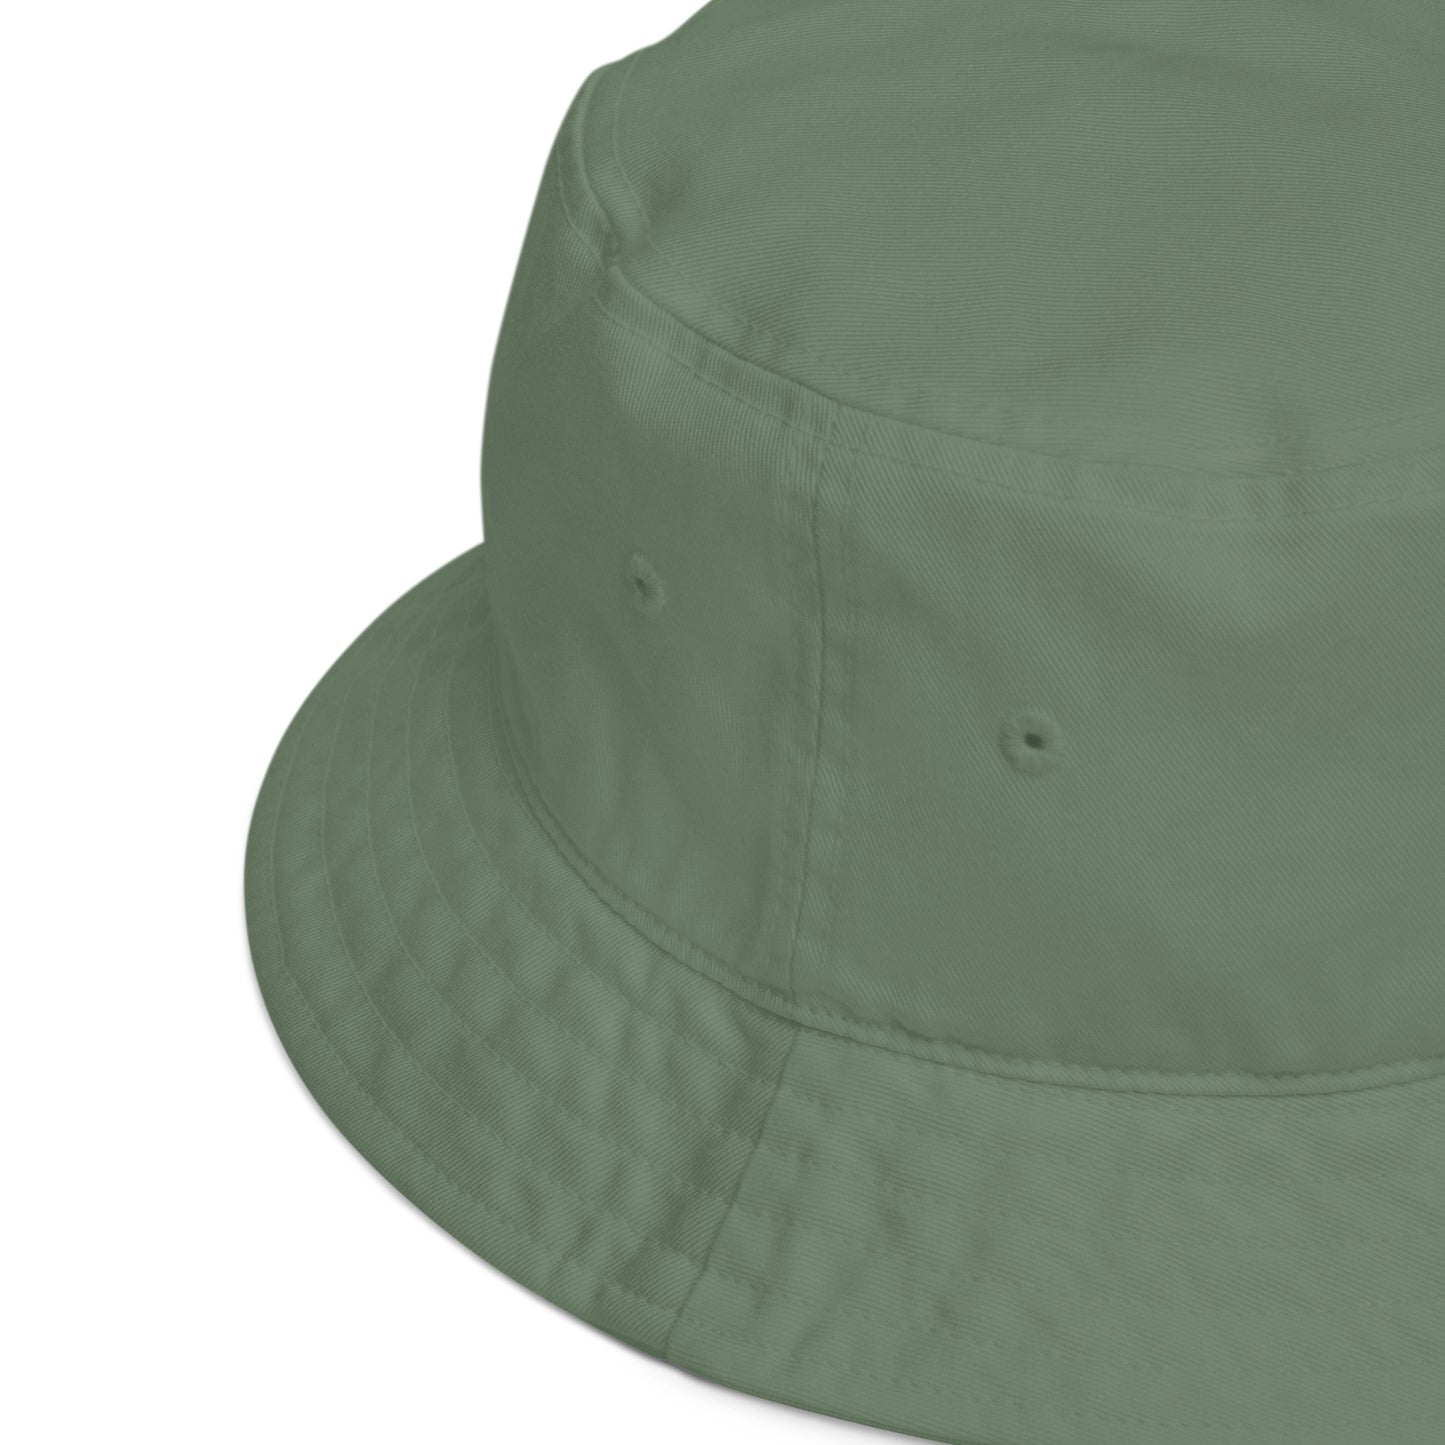 840 Organic bucket hat embroidered